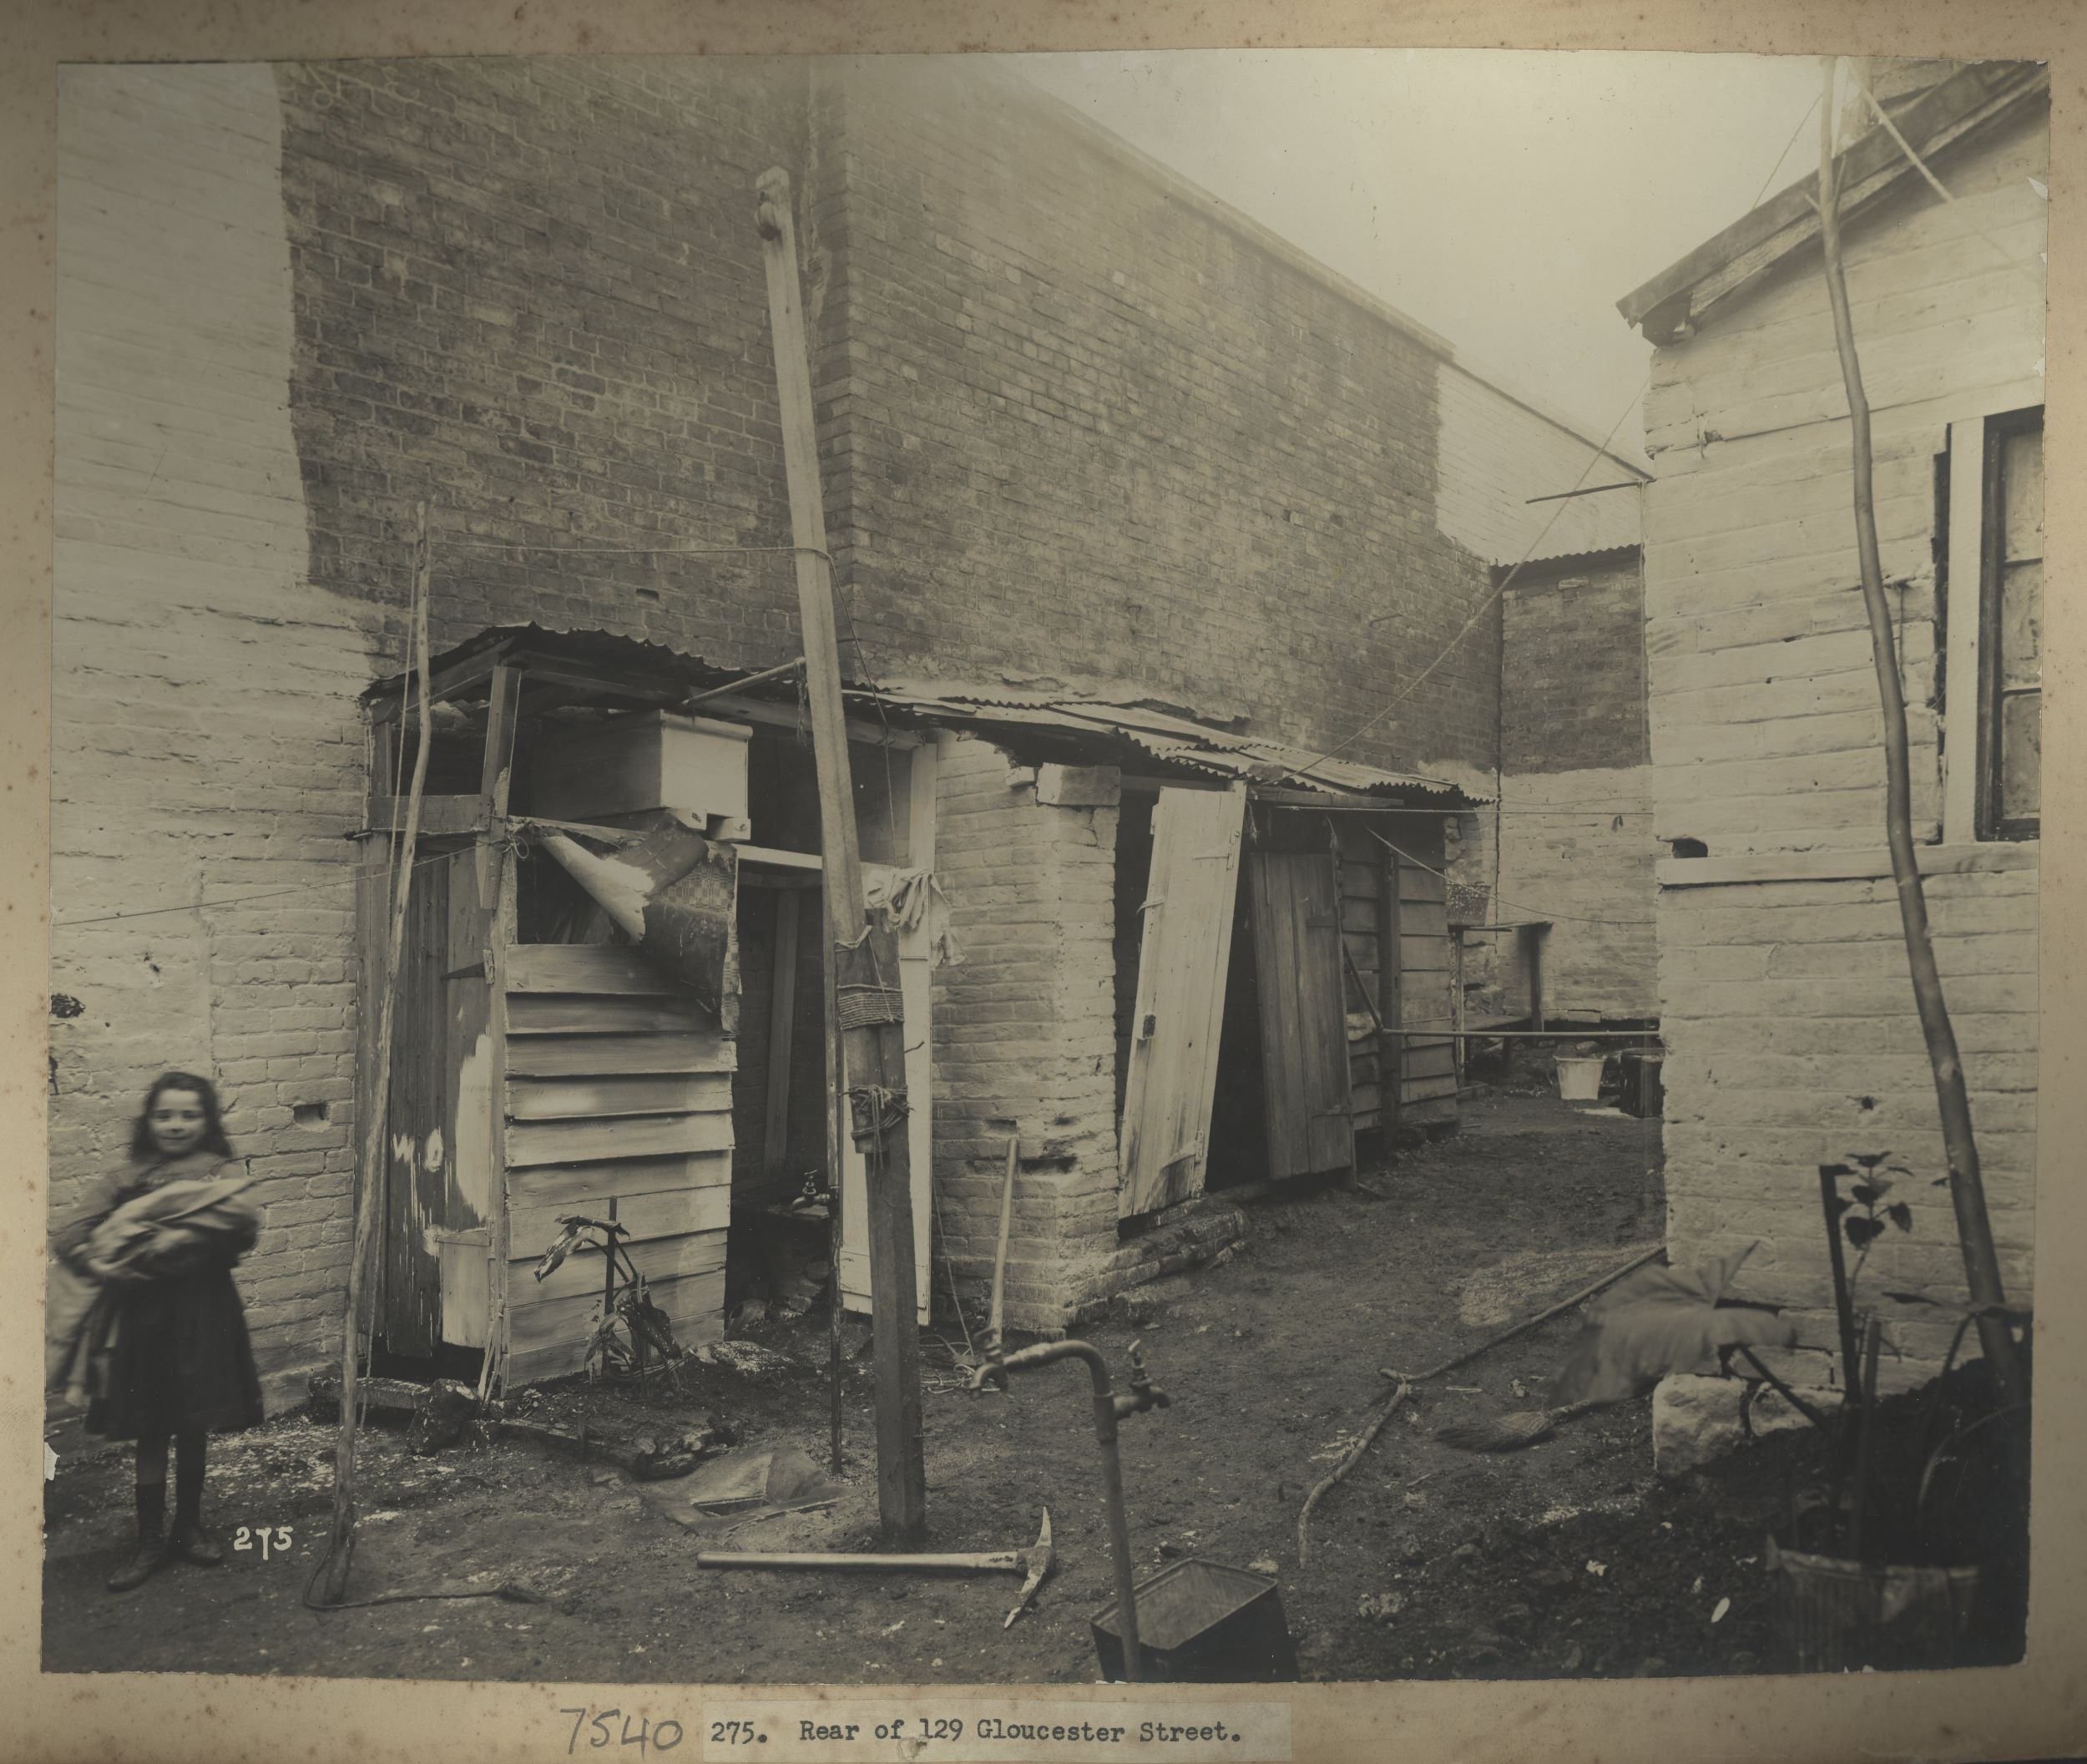 A young girl stands to the left of a backyard holding a baby. Wooden extensions from the brick building are in disrepair and the doors are falling off